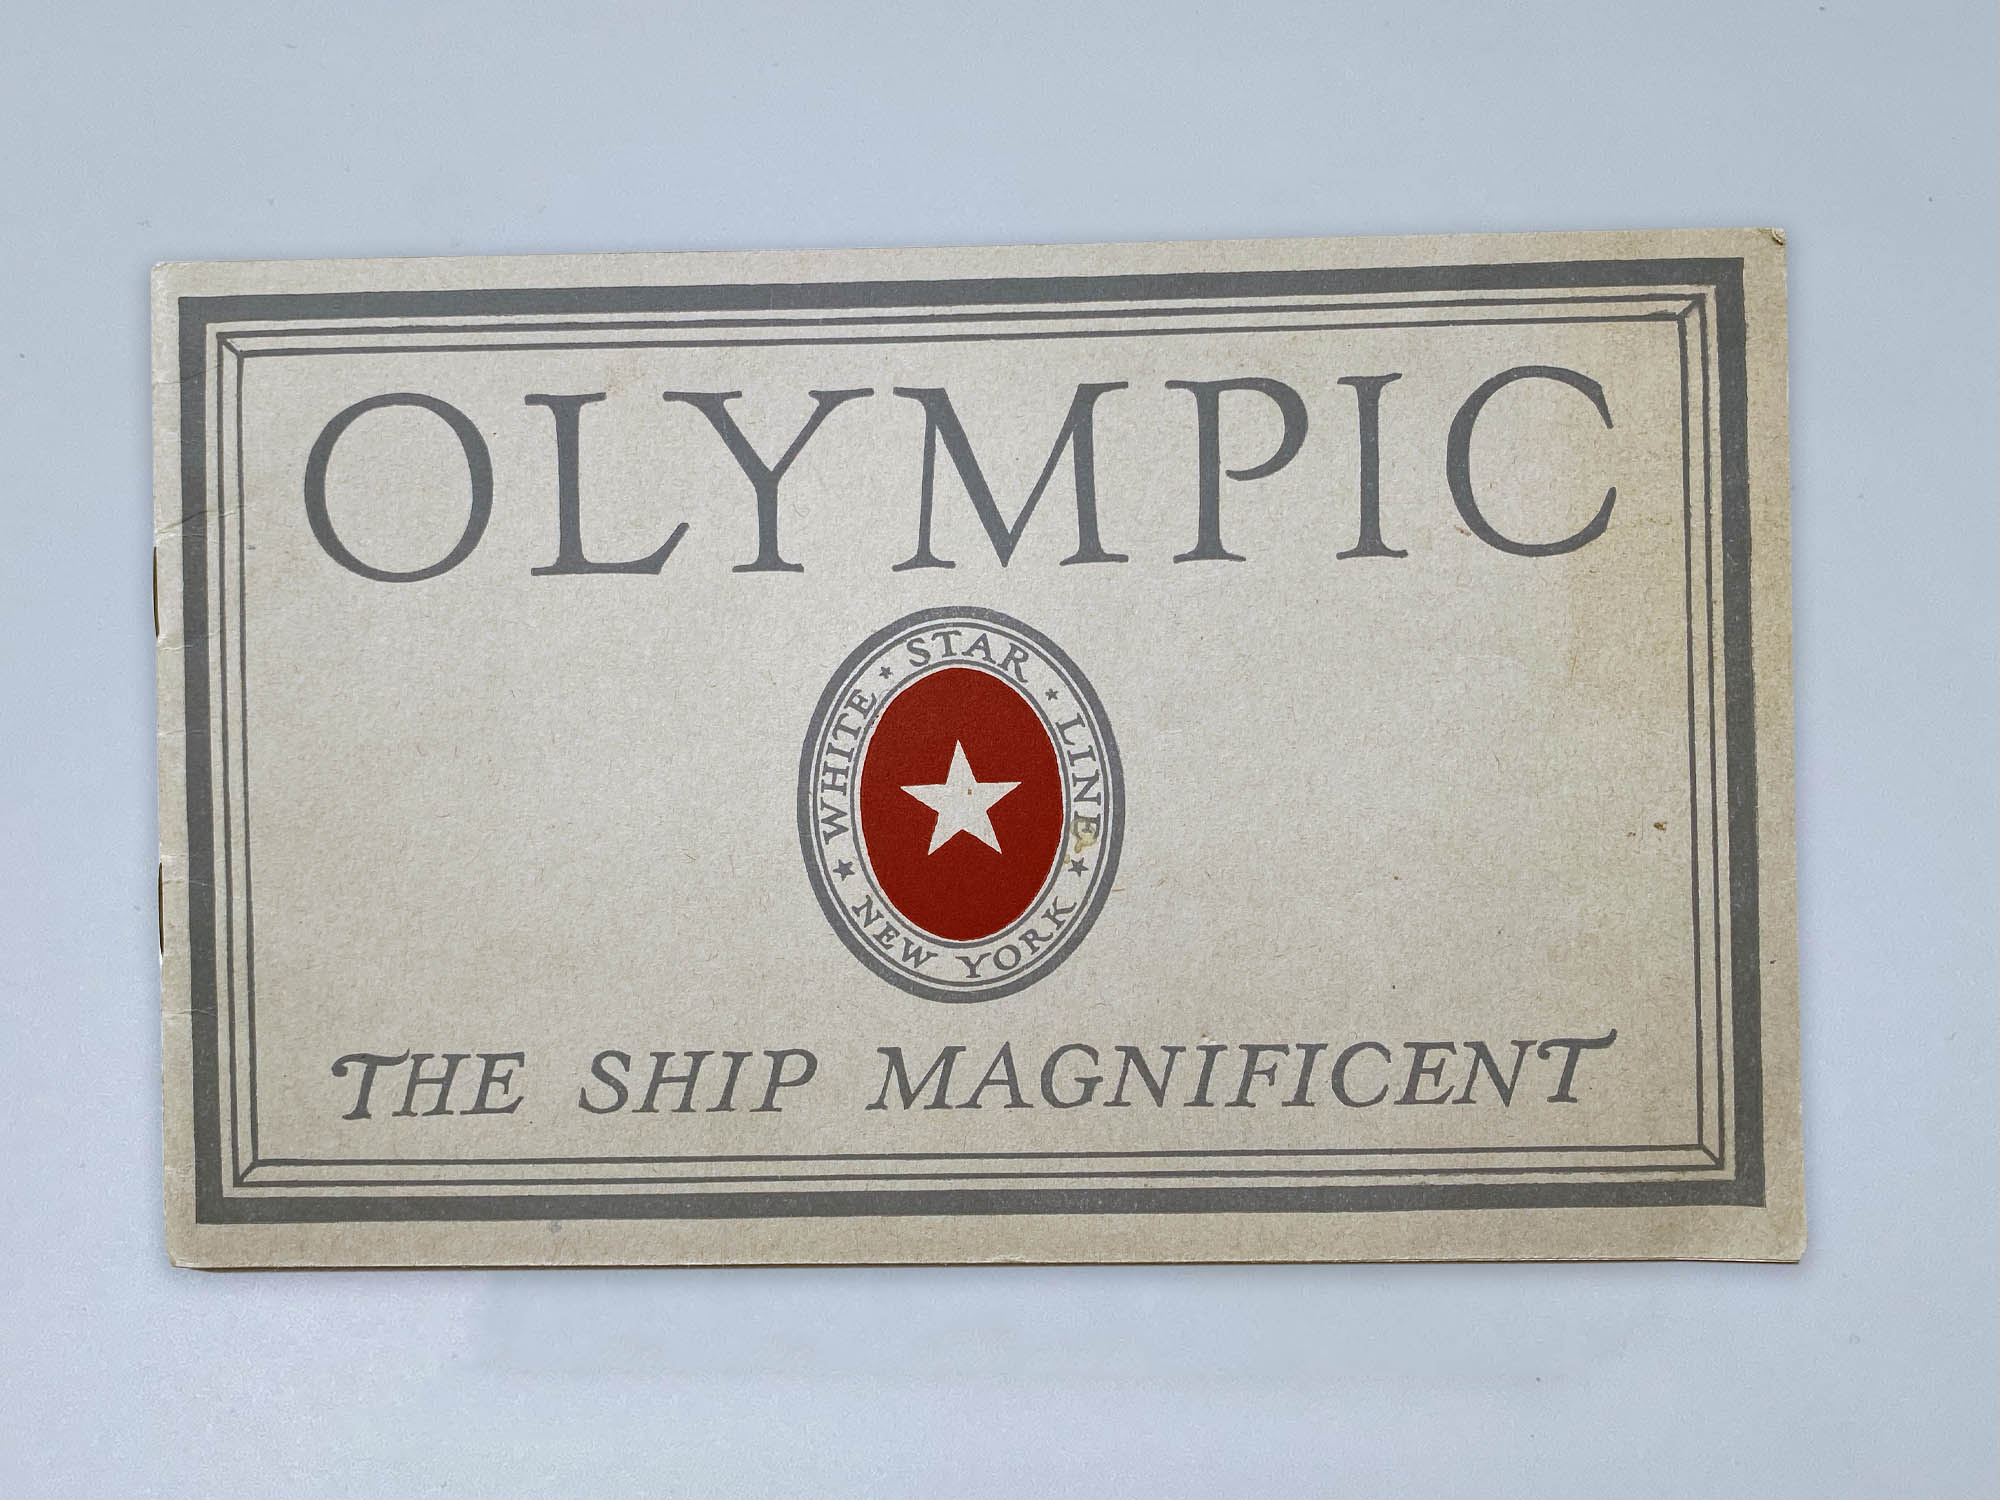 Olympic Ship Magnificant Brochure